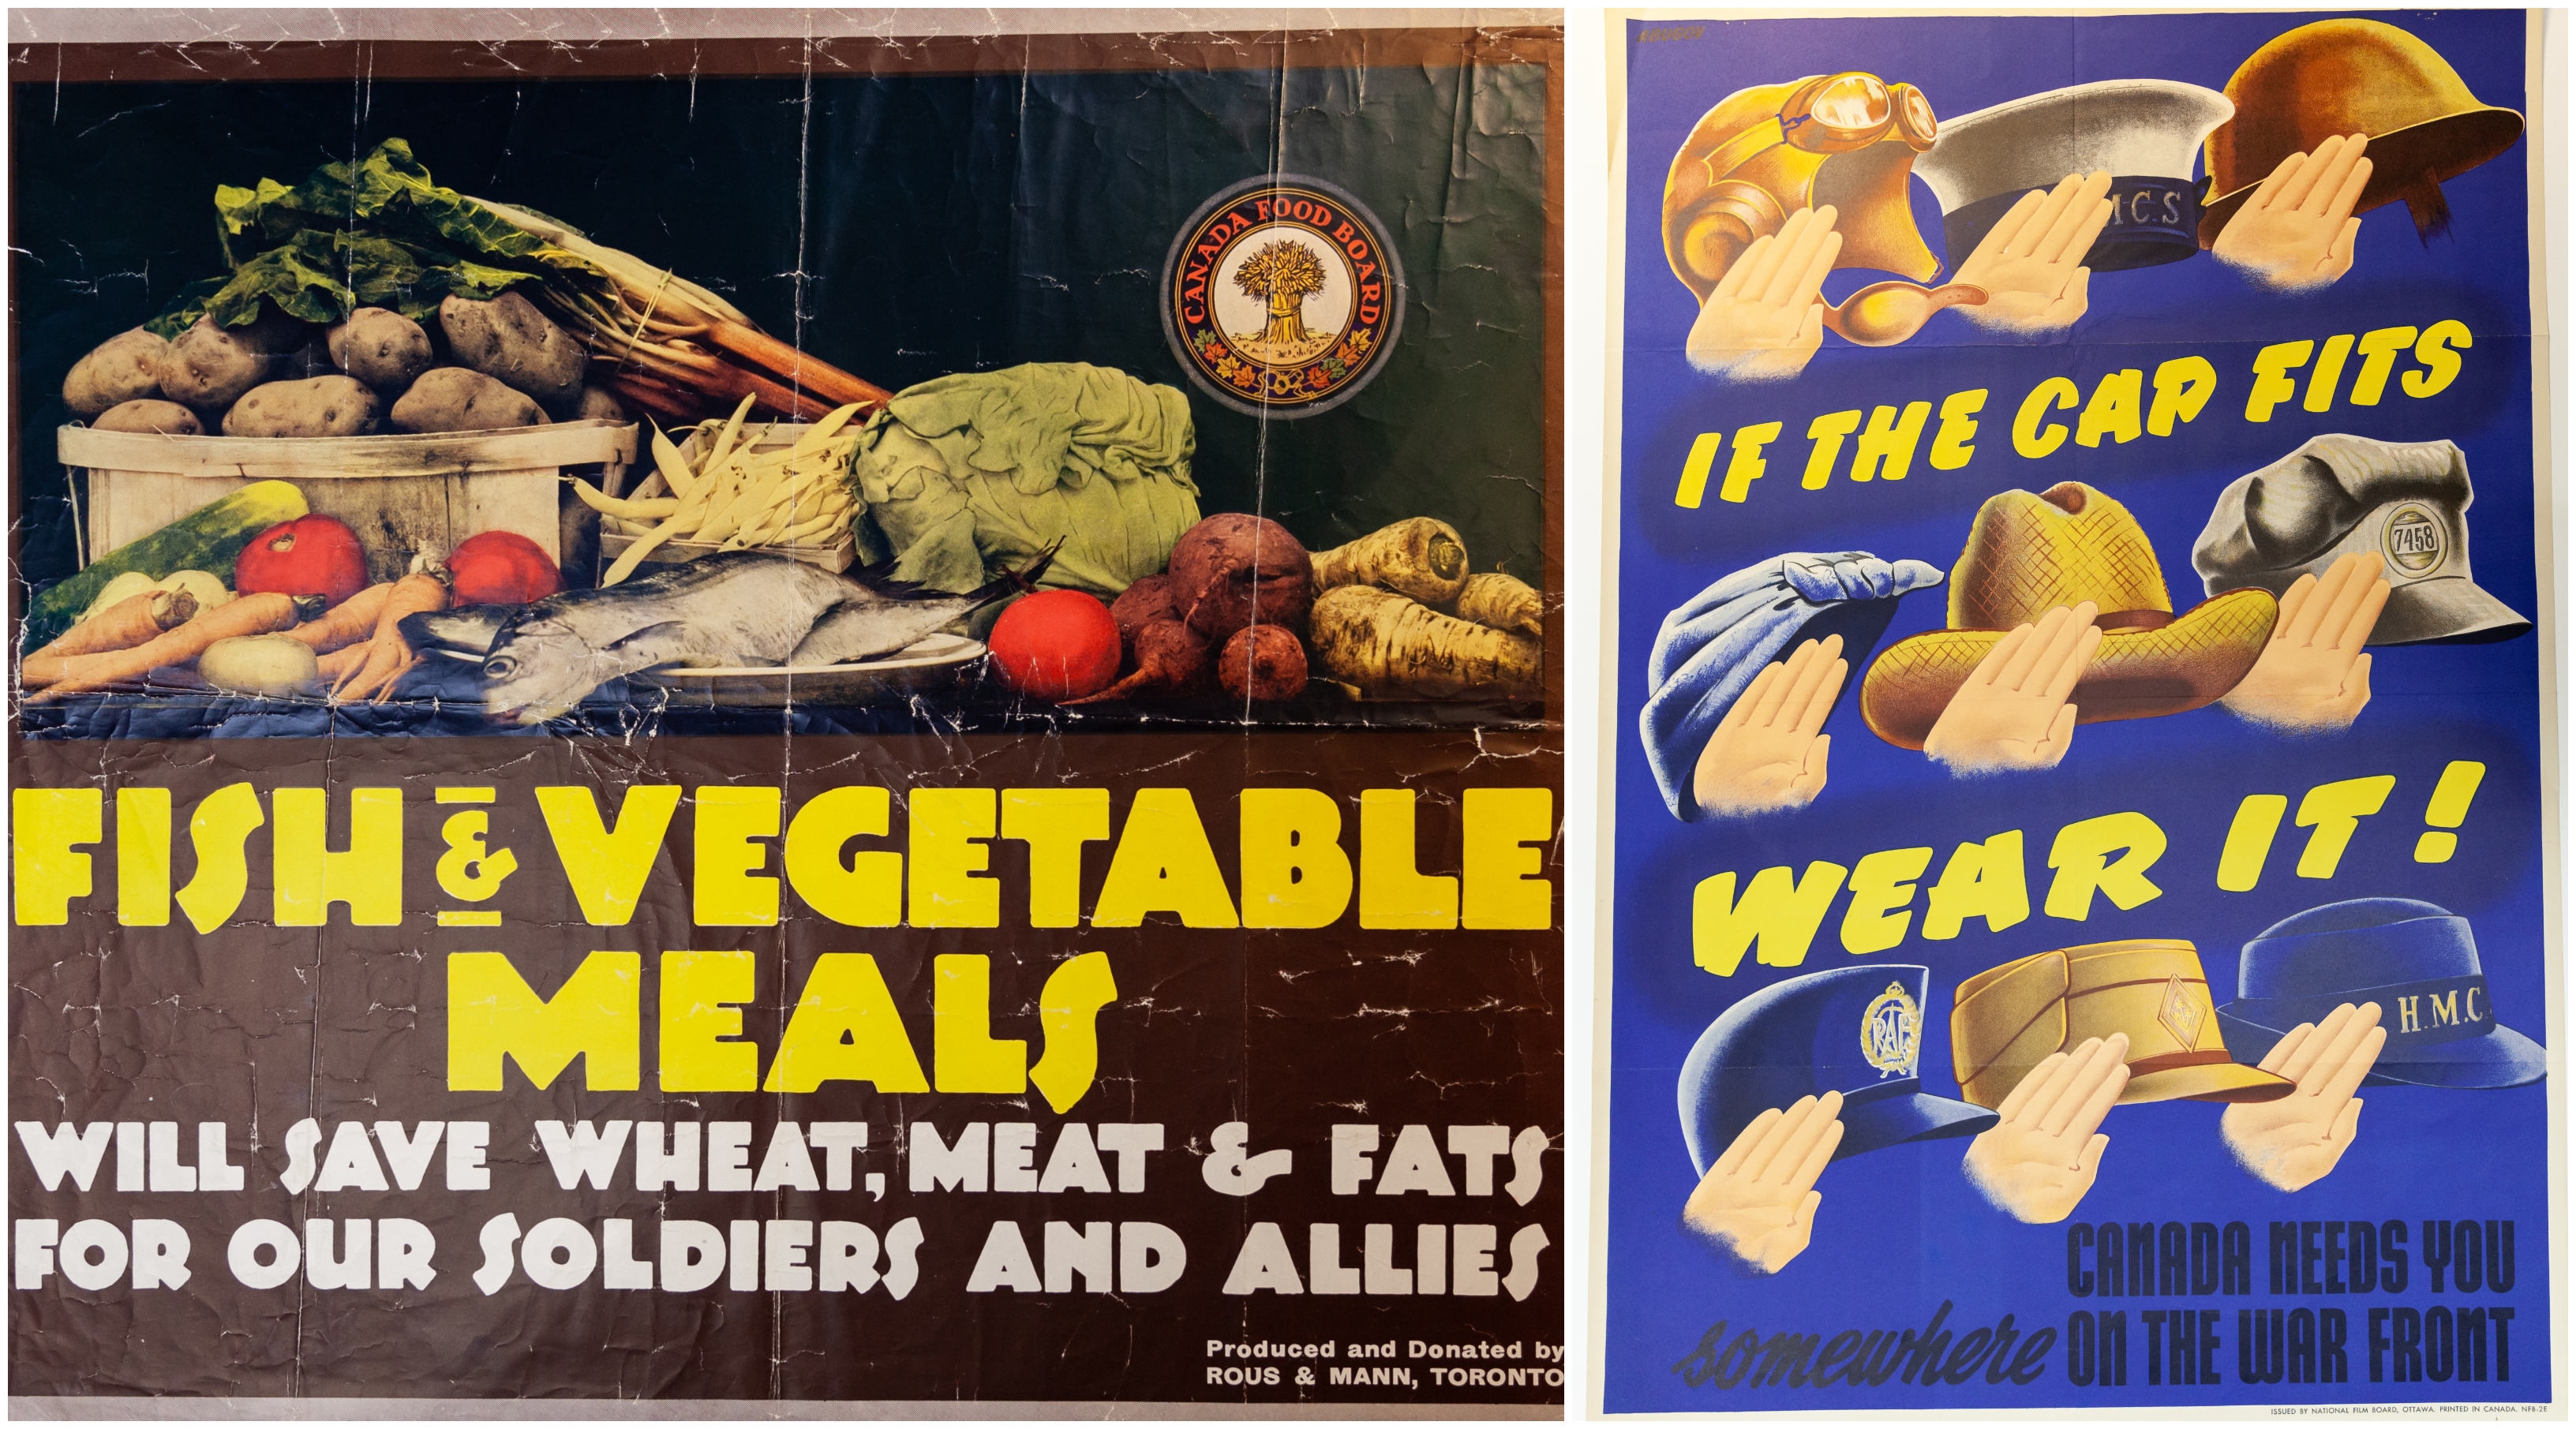 “Fish and Vegetable Meals will save wheat, meat and fats for our soldiers and allies” poster, no C25, First World War poster collection, 1914. “If the Cap Fits, Wear it!” poster, no. C3, Second World War poster collection, 1939-1945